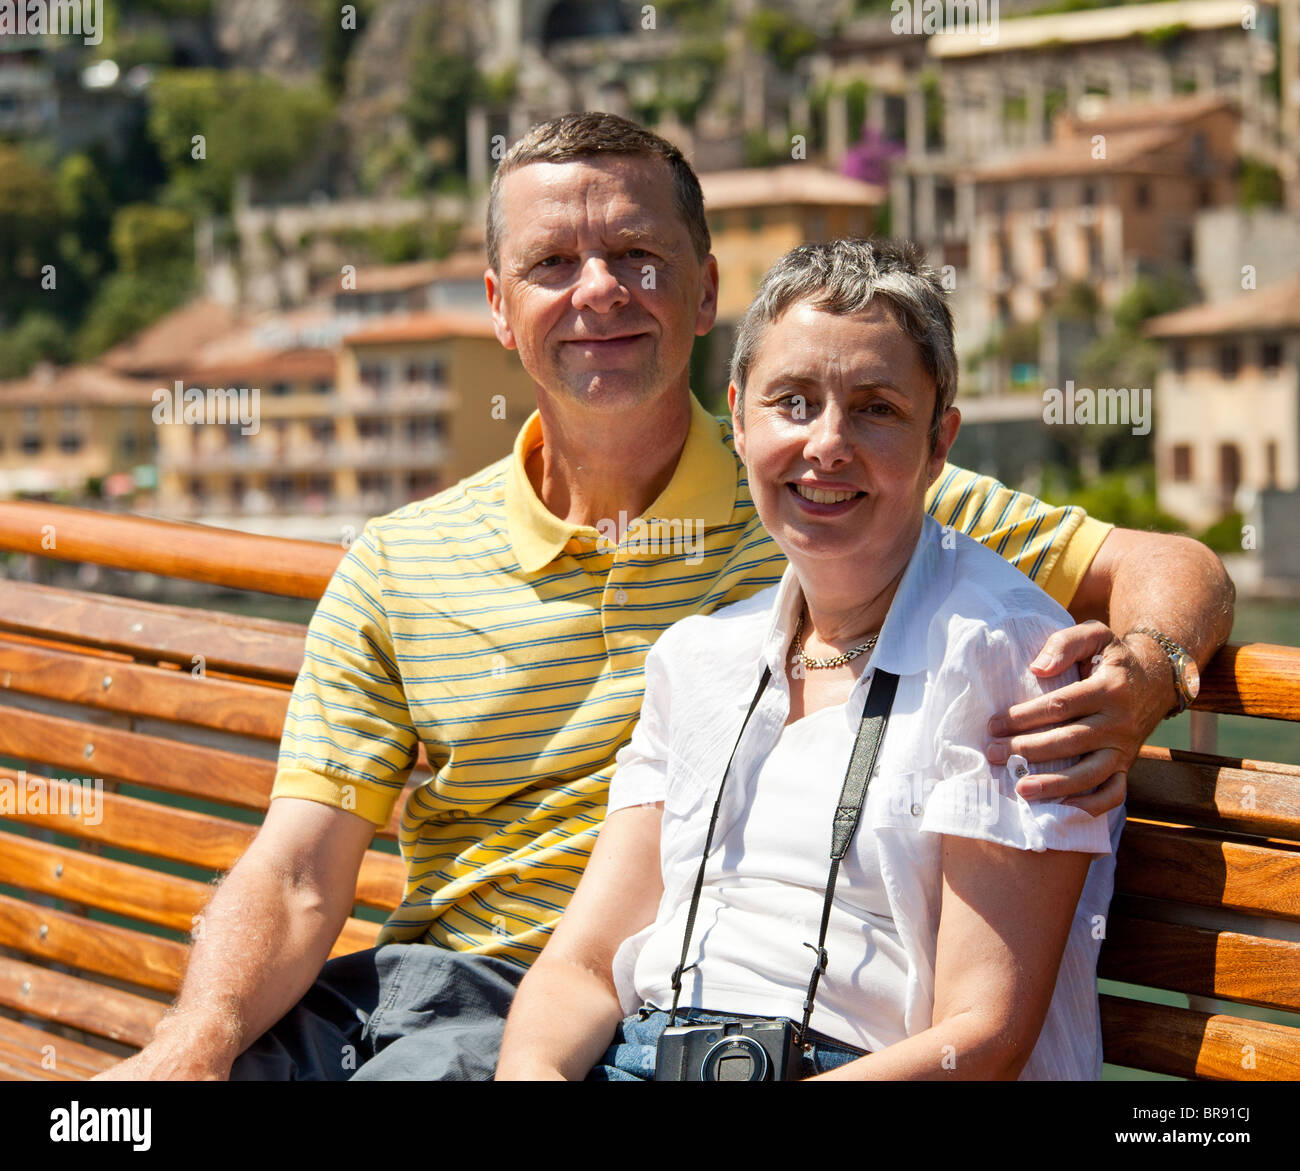 Middle aged couple portrait on vacation and facing the camera smiling Stock Photo